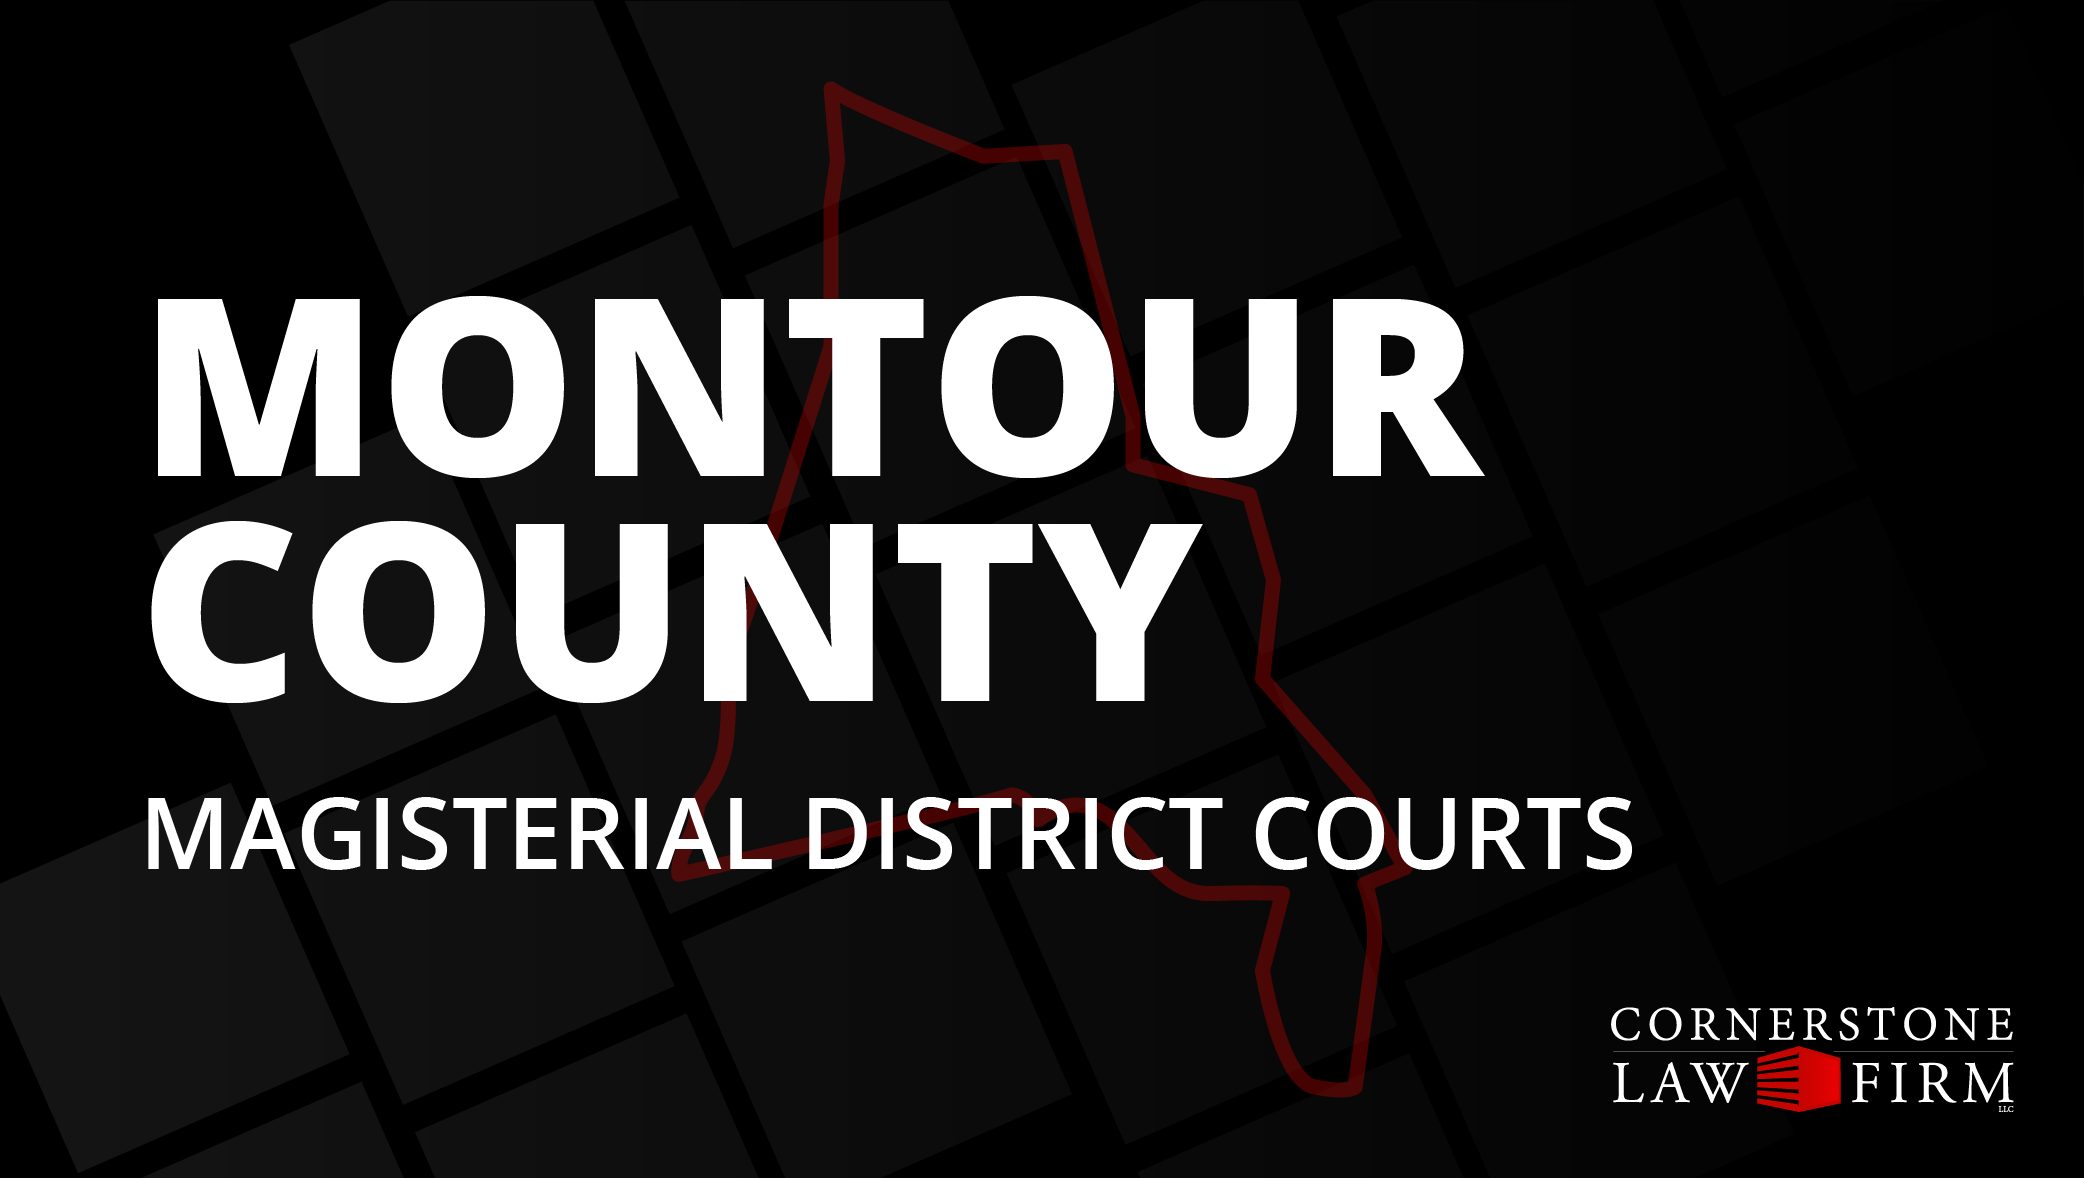 The words "Montour County Magisterial District Courts" over a black background with a faded red outline of the county.